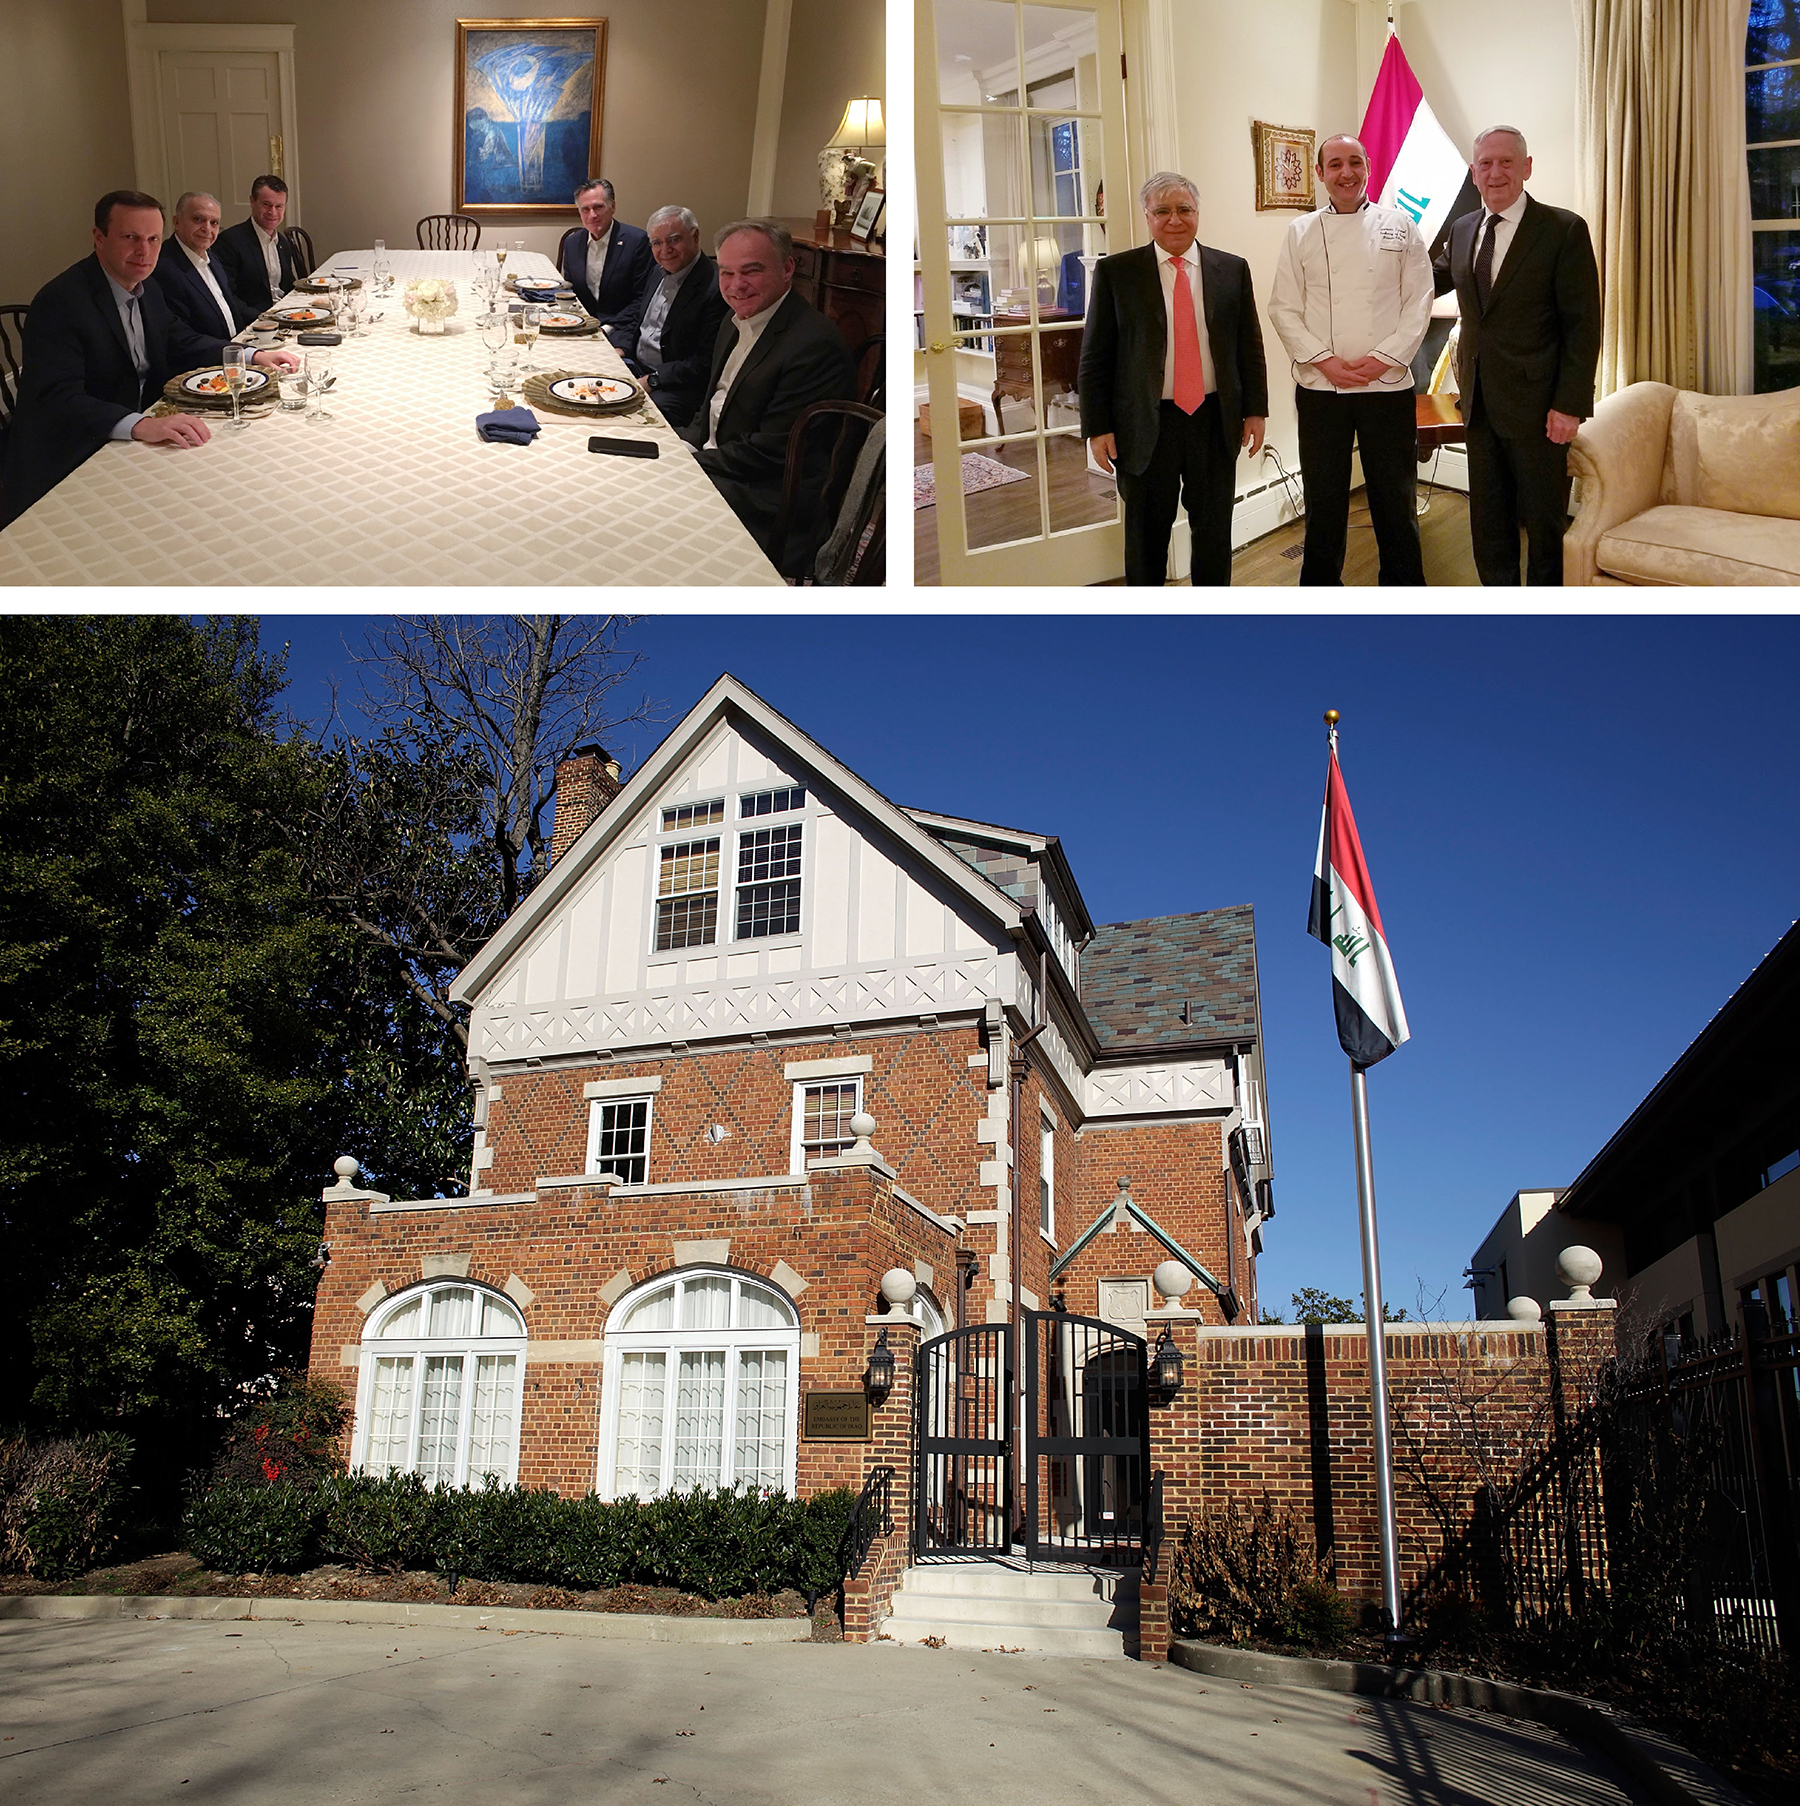 Left: Sens. Chris Murphy, Todd Young, Mitt Romney and Tim Kaine have dinner with Mohamed Ali Alhakim and Fareed Yasseen at the Iraqi Embassy in Washington. Right: Yasseen poses with Jamal Amroune and Jim Mattis. Bottom: The Iraqi Embassy in Washington is pictured. 